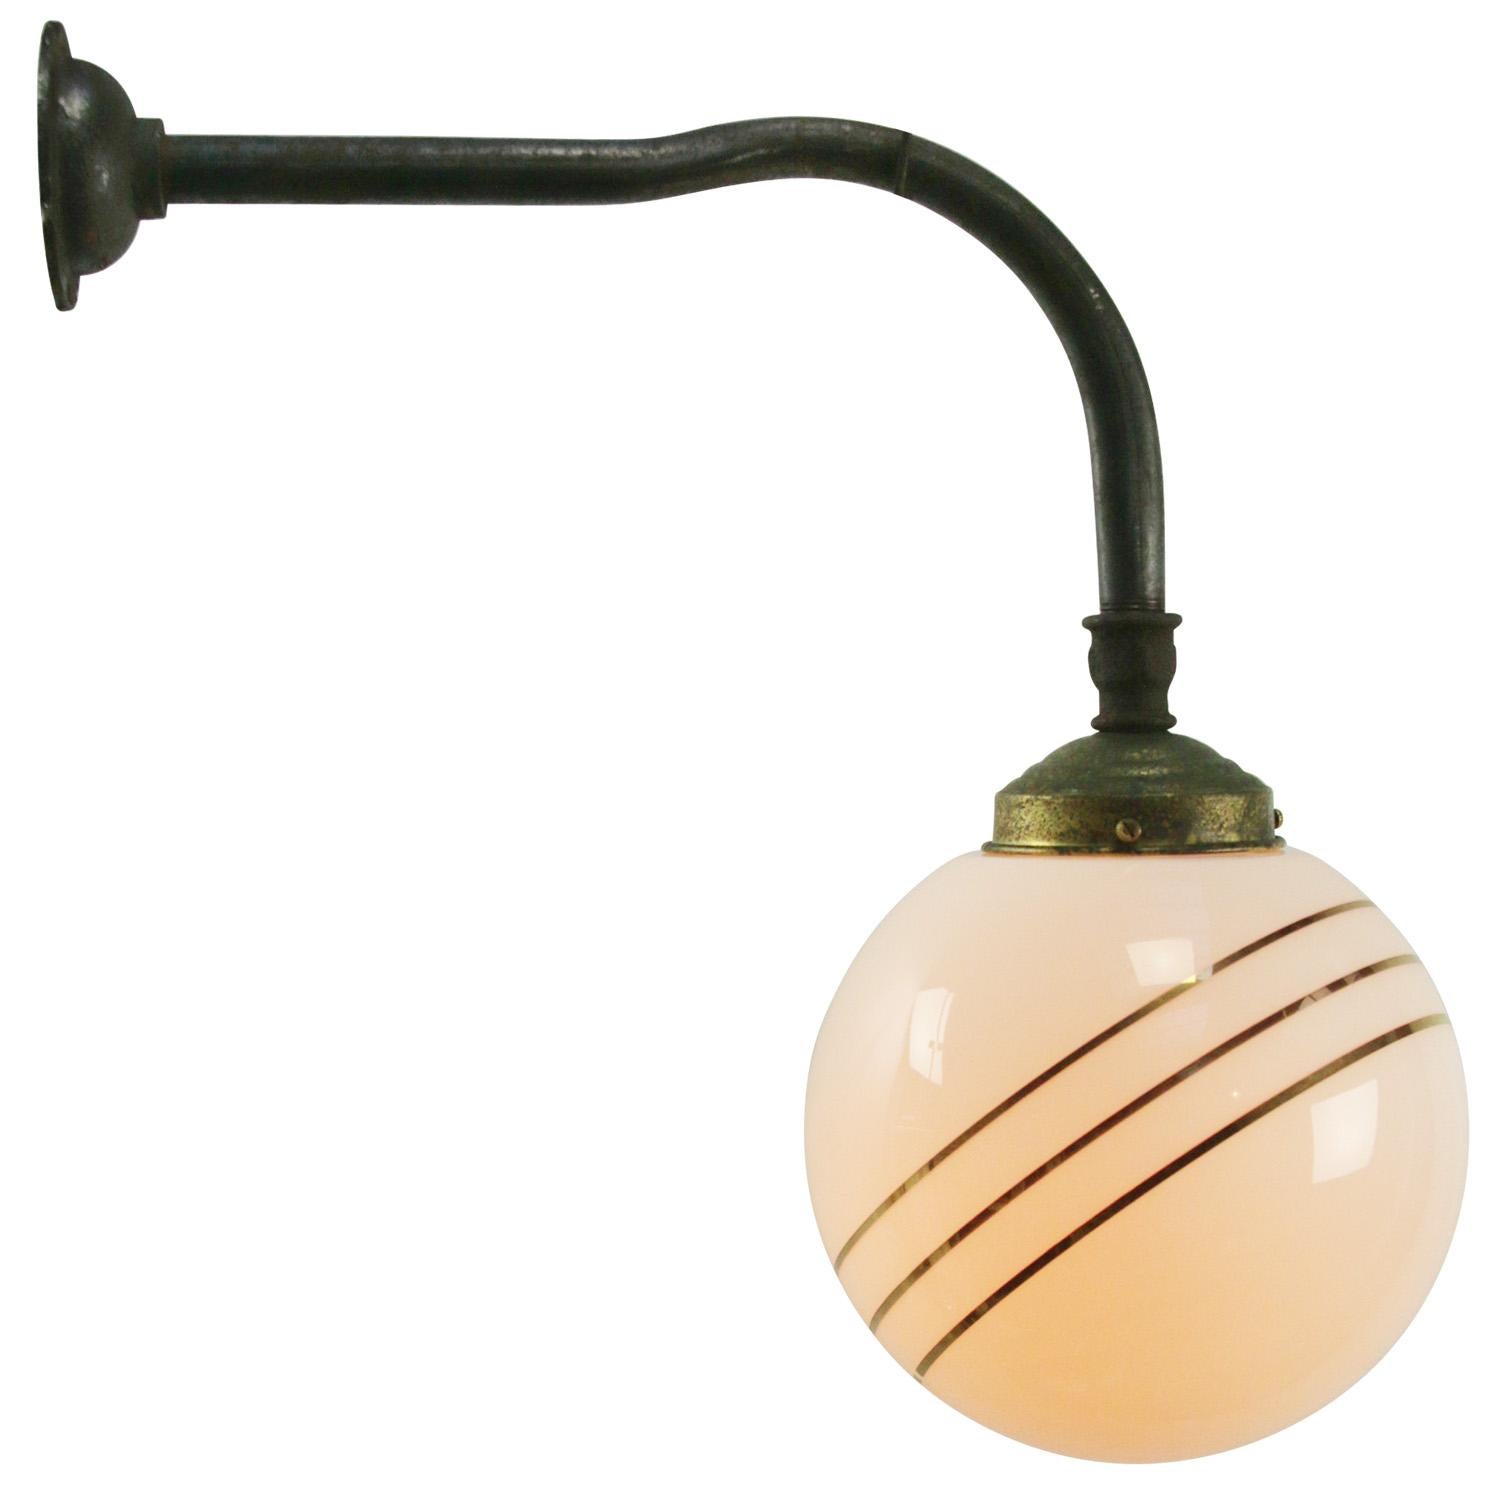 Opaline glass, brass and iron industrial wall light
white opaline glass with 3 golden stripes.

Diameter cast iron wall piece: 8 cm, 3 holes to secure

Weight: 1.20 kg / 2.6 lb

Priced per individual item. All lamps have been made suitable by